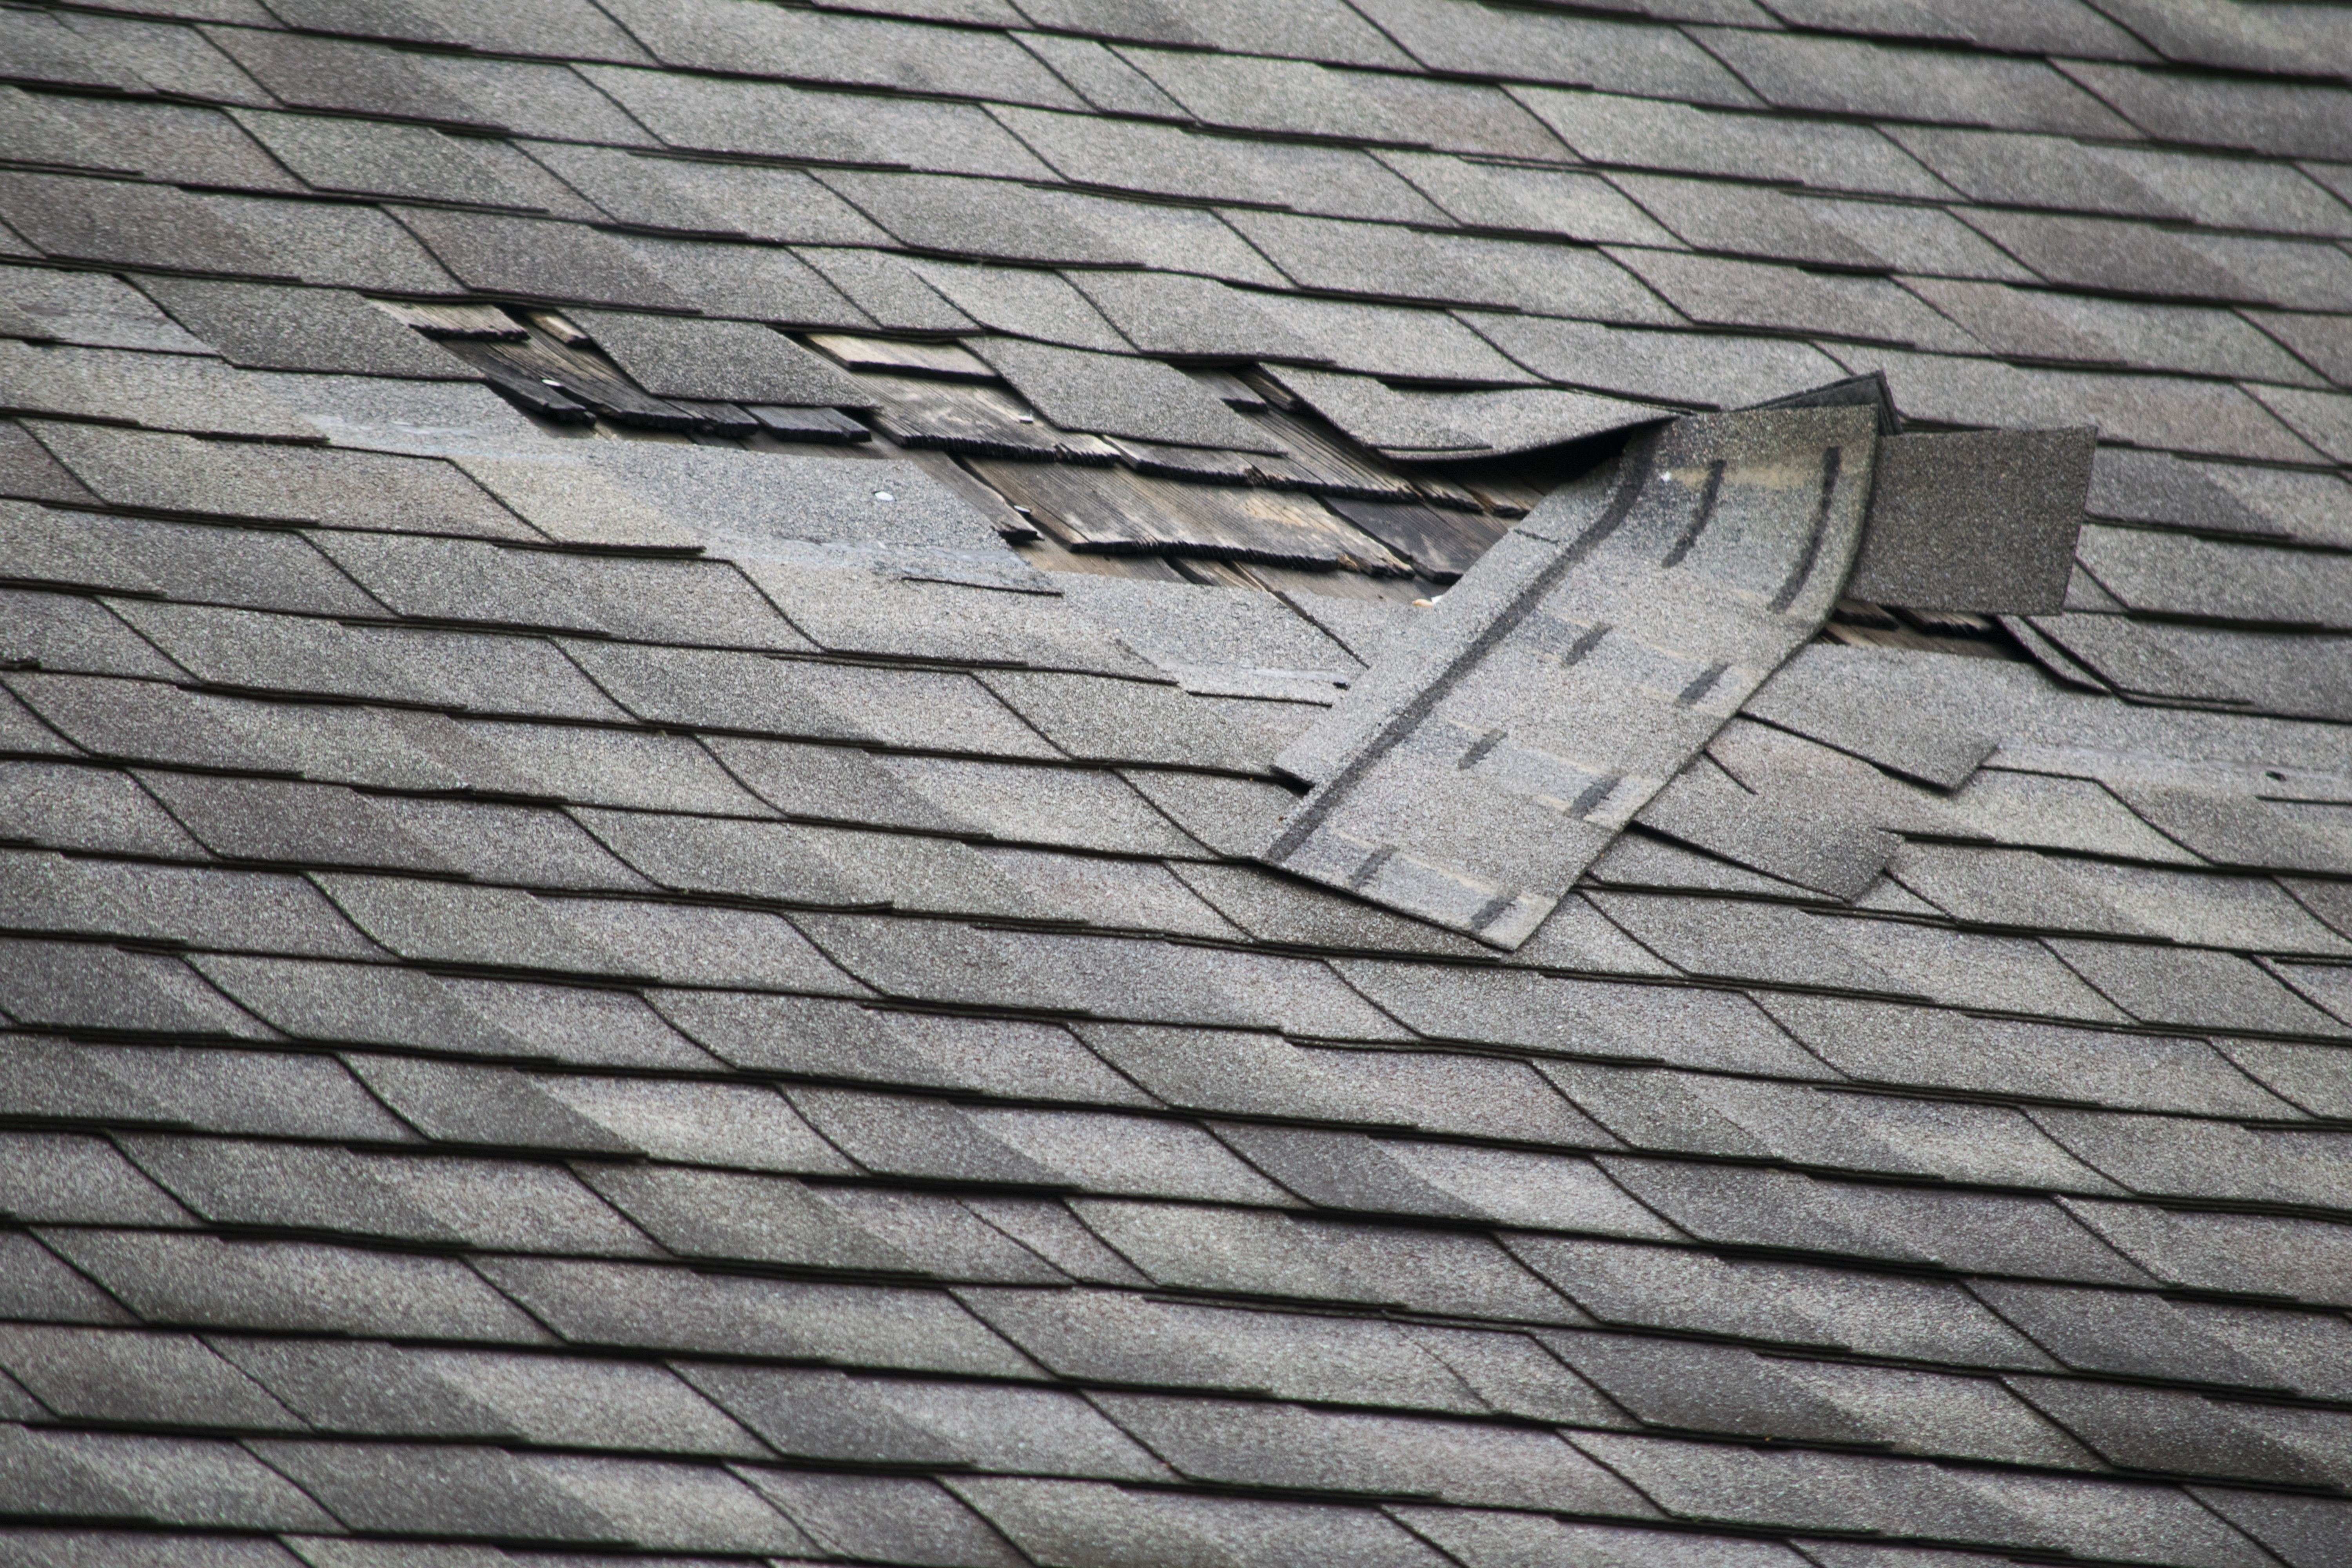 Goose Creek Roof Repair and Replacement Services From Titan Roofing LLC 843-647-3183